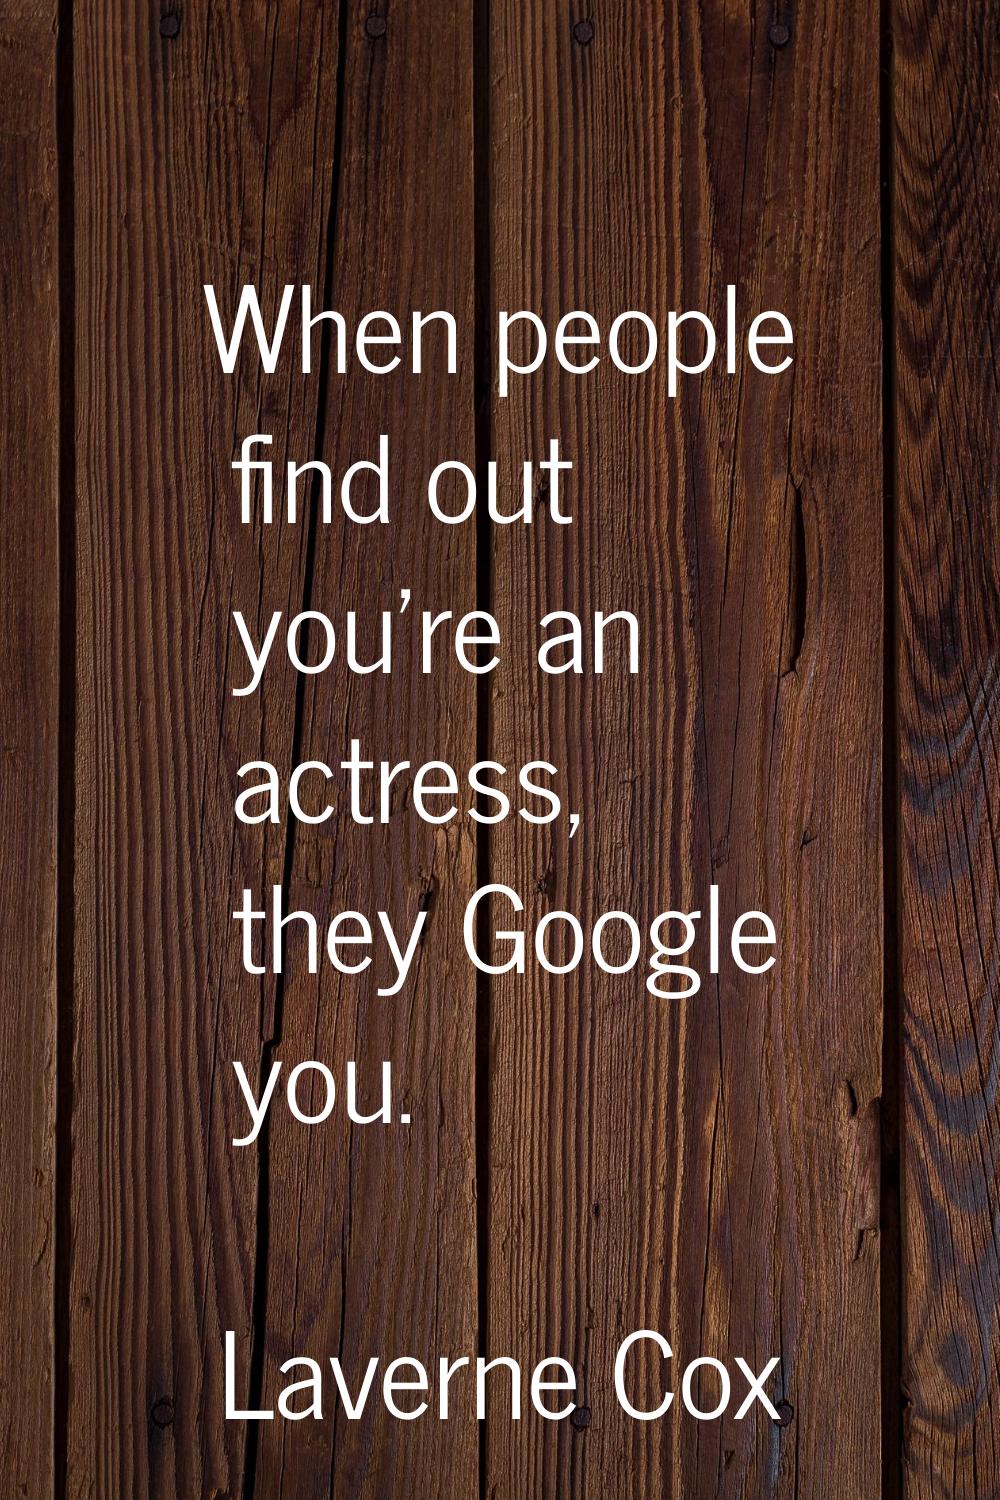 When people find out you're an actress, they Google you.